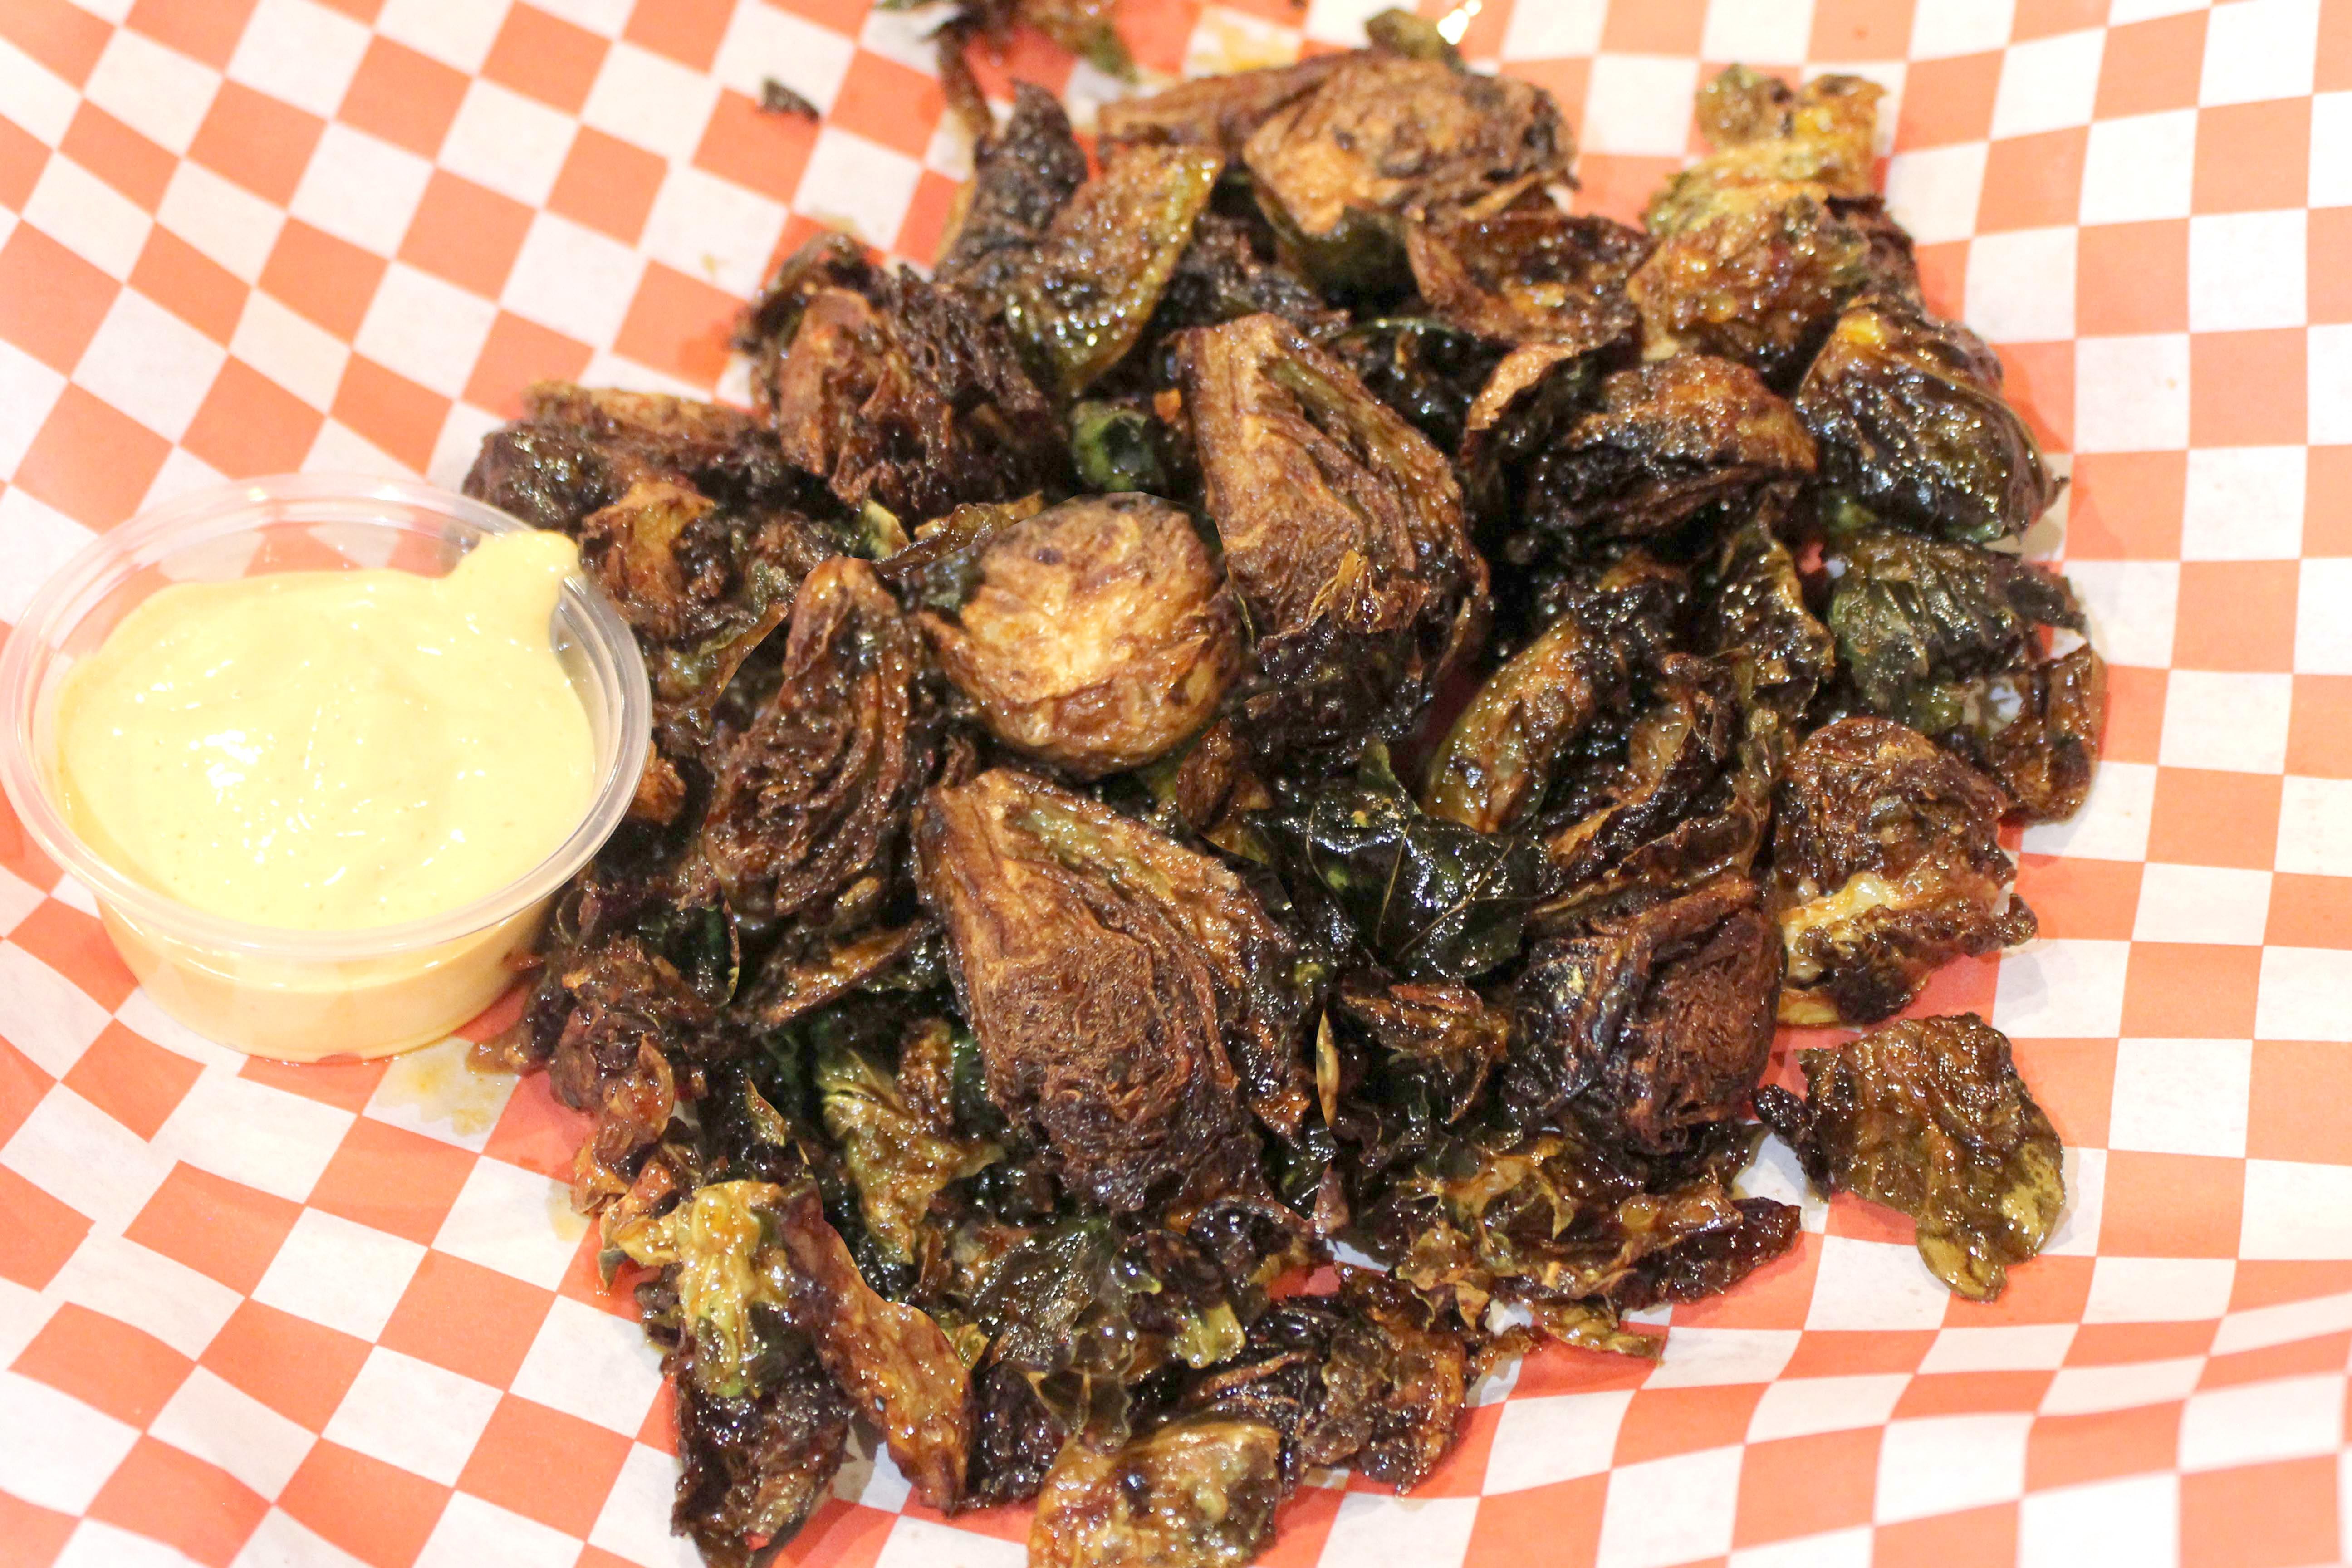 Spicy Fried Brussel Sprout